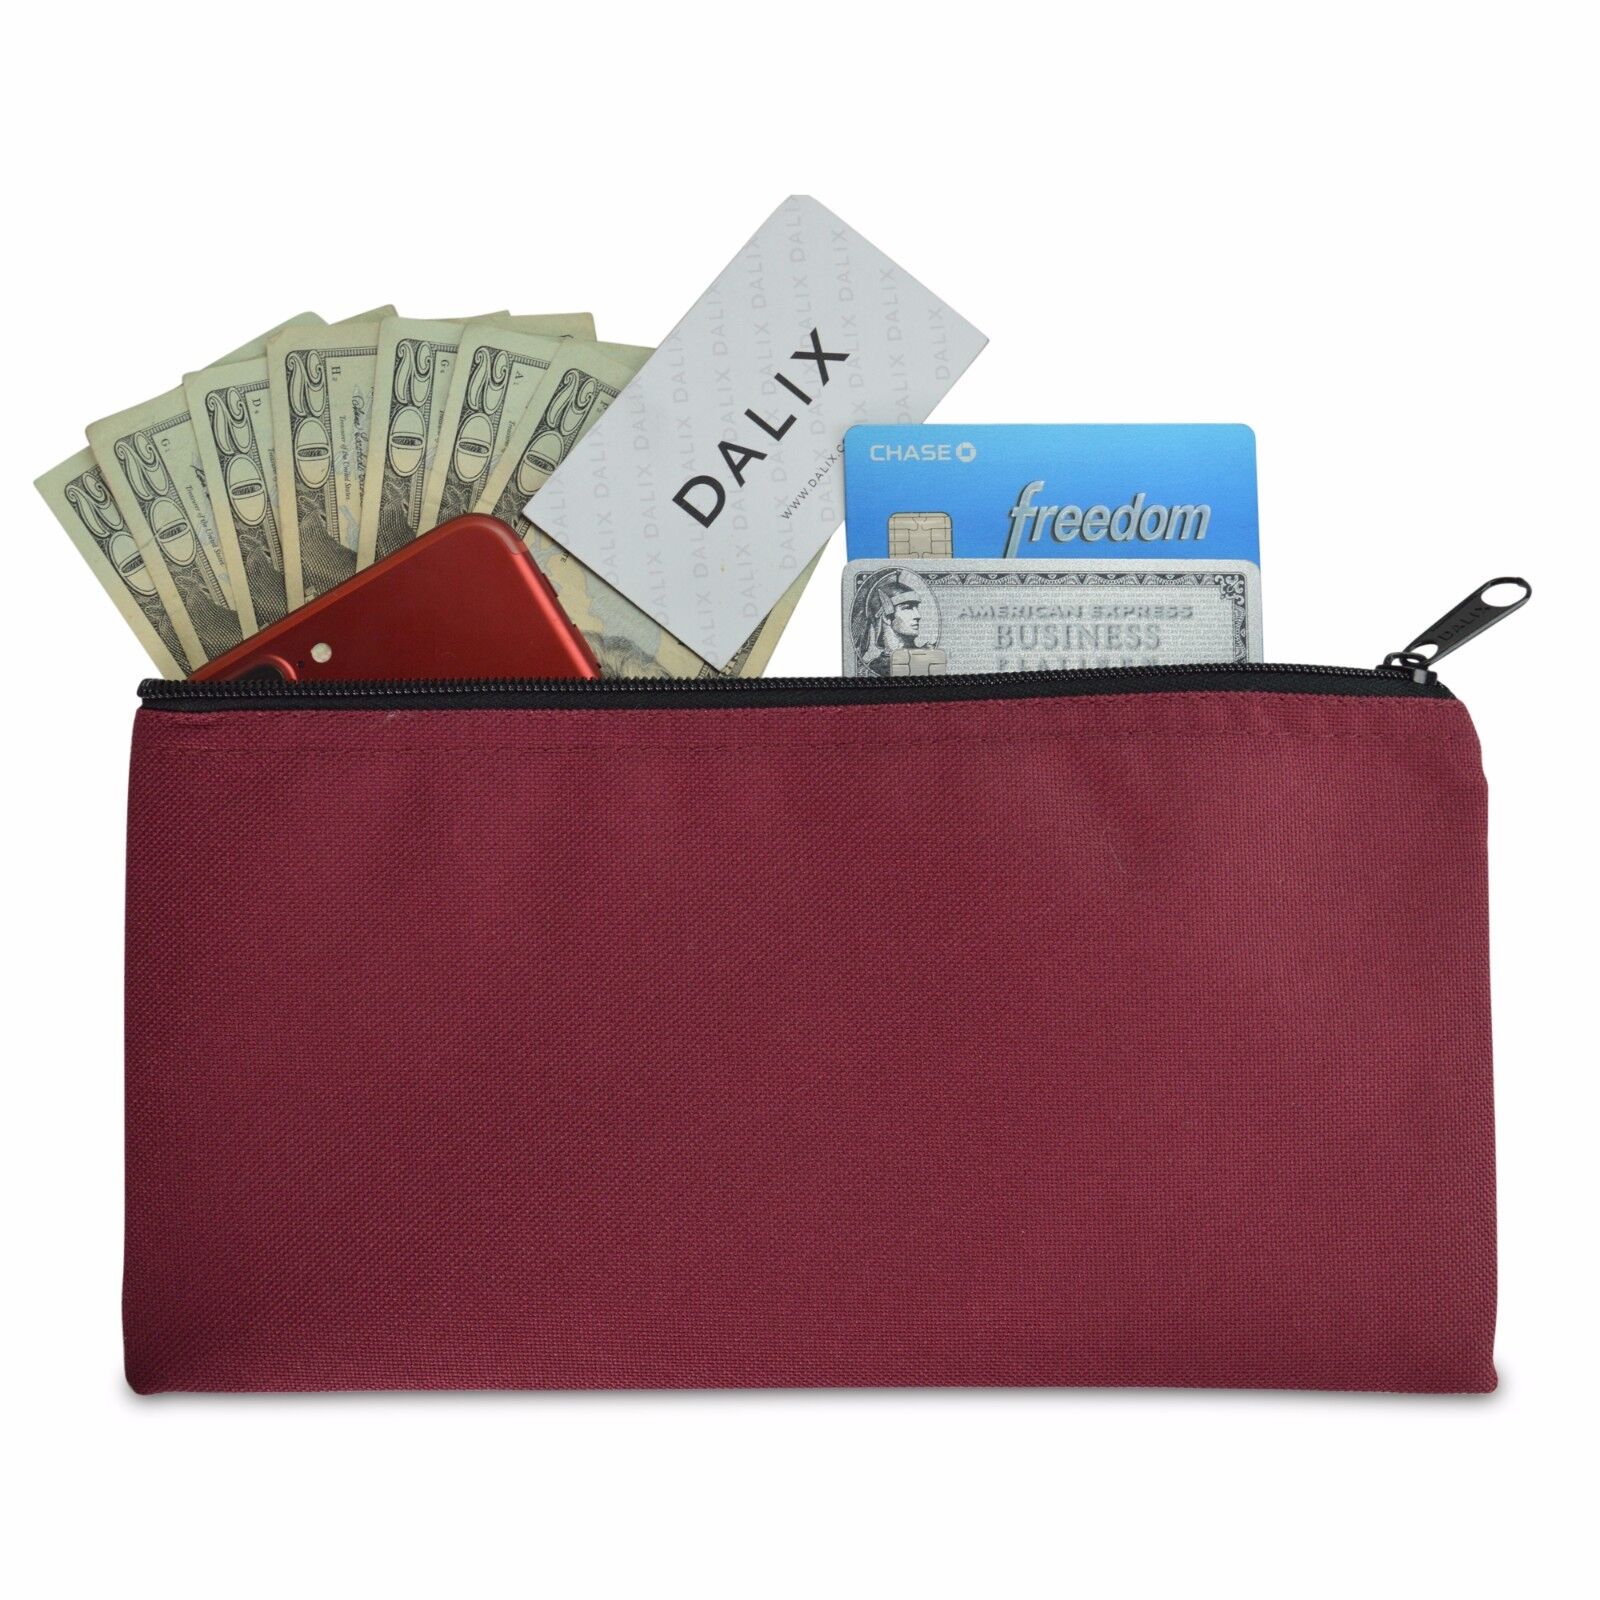 Deposit Bag Bank Pouch Zippered Safe Money Bag Organizer in Maroon Red